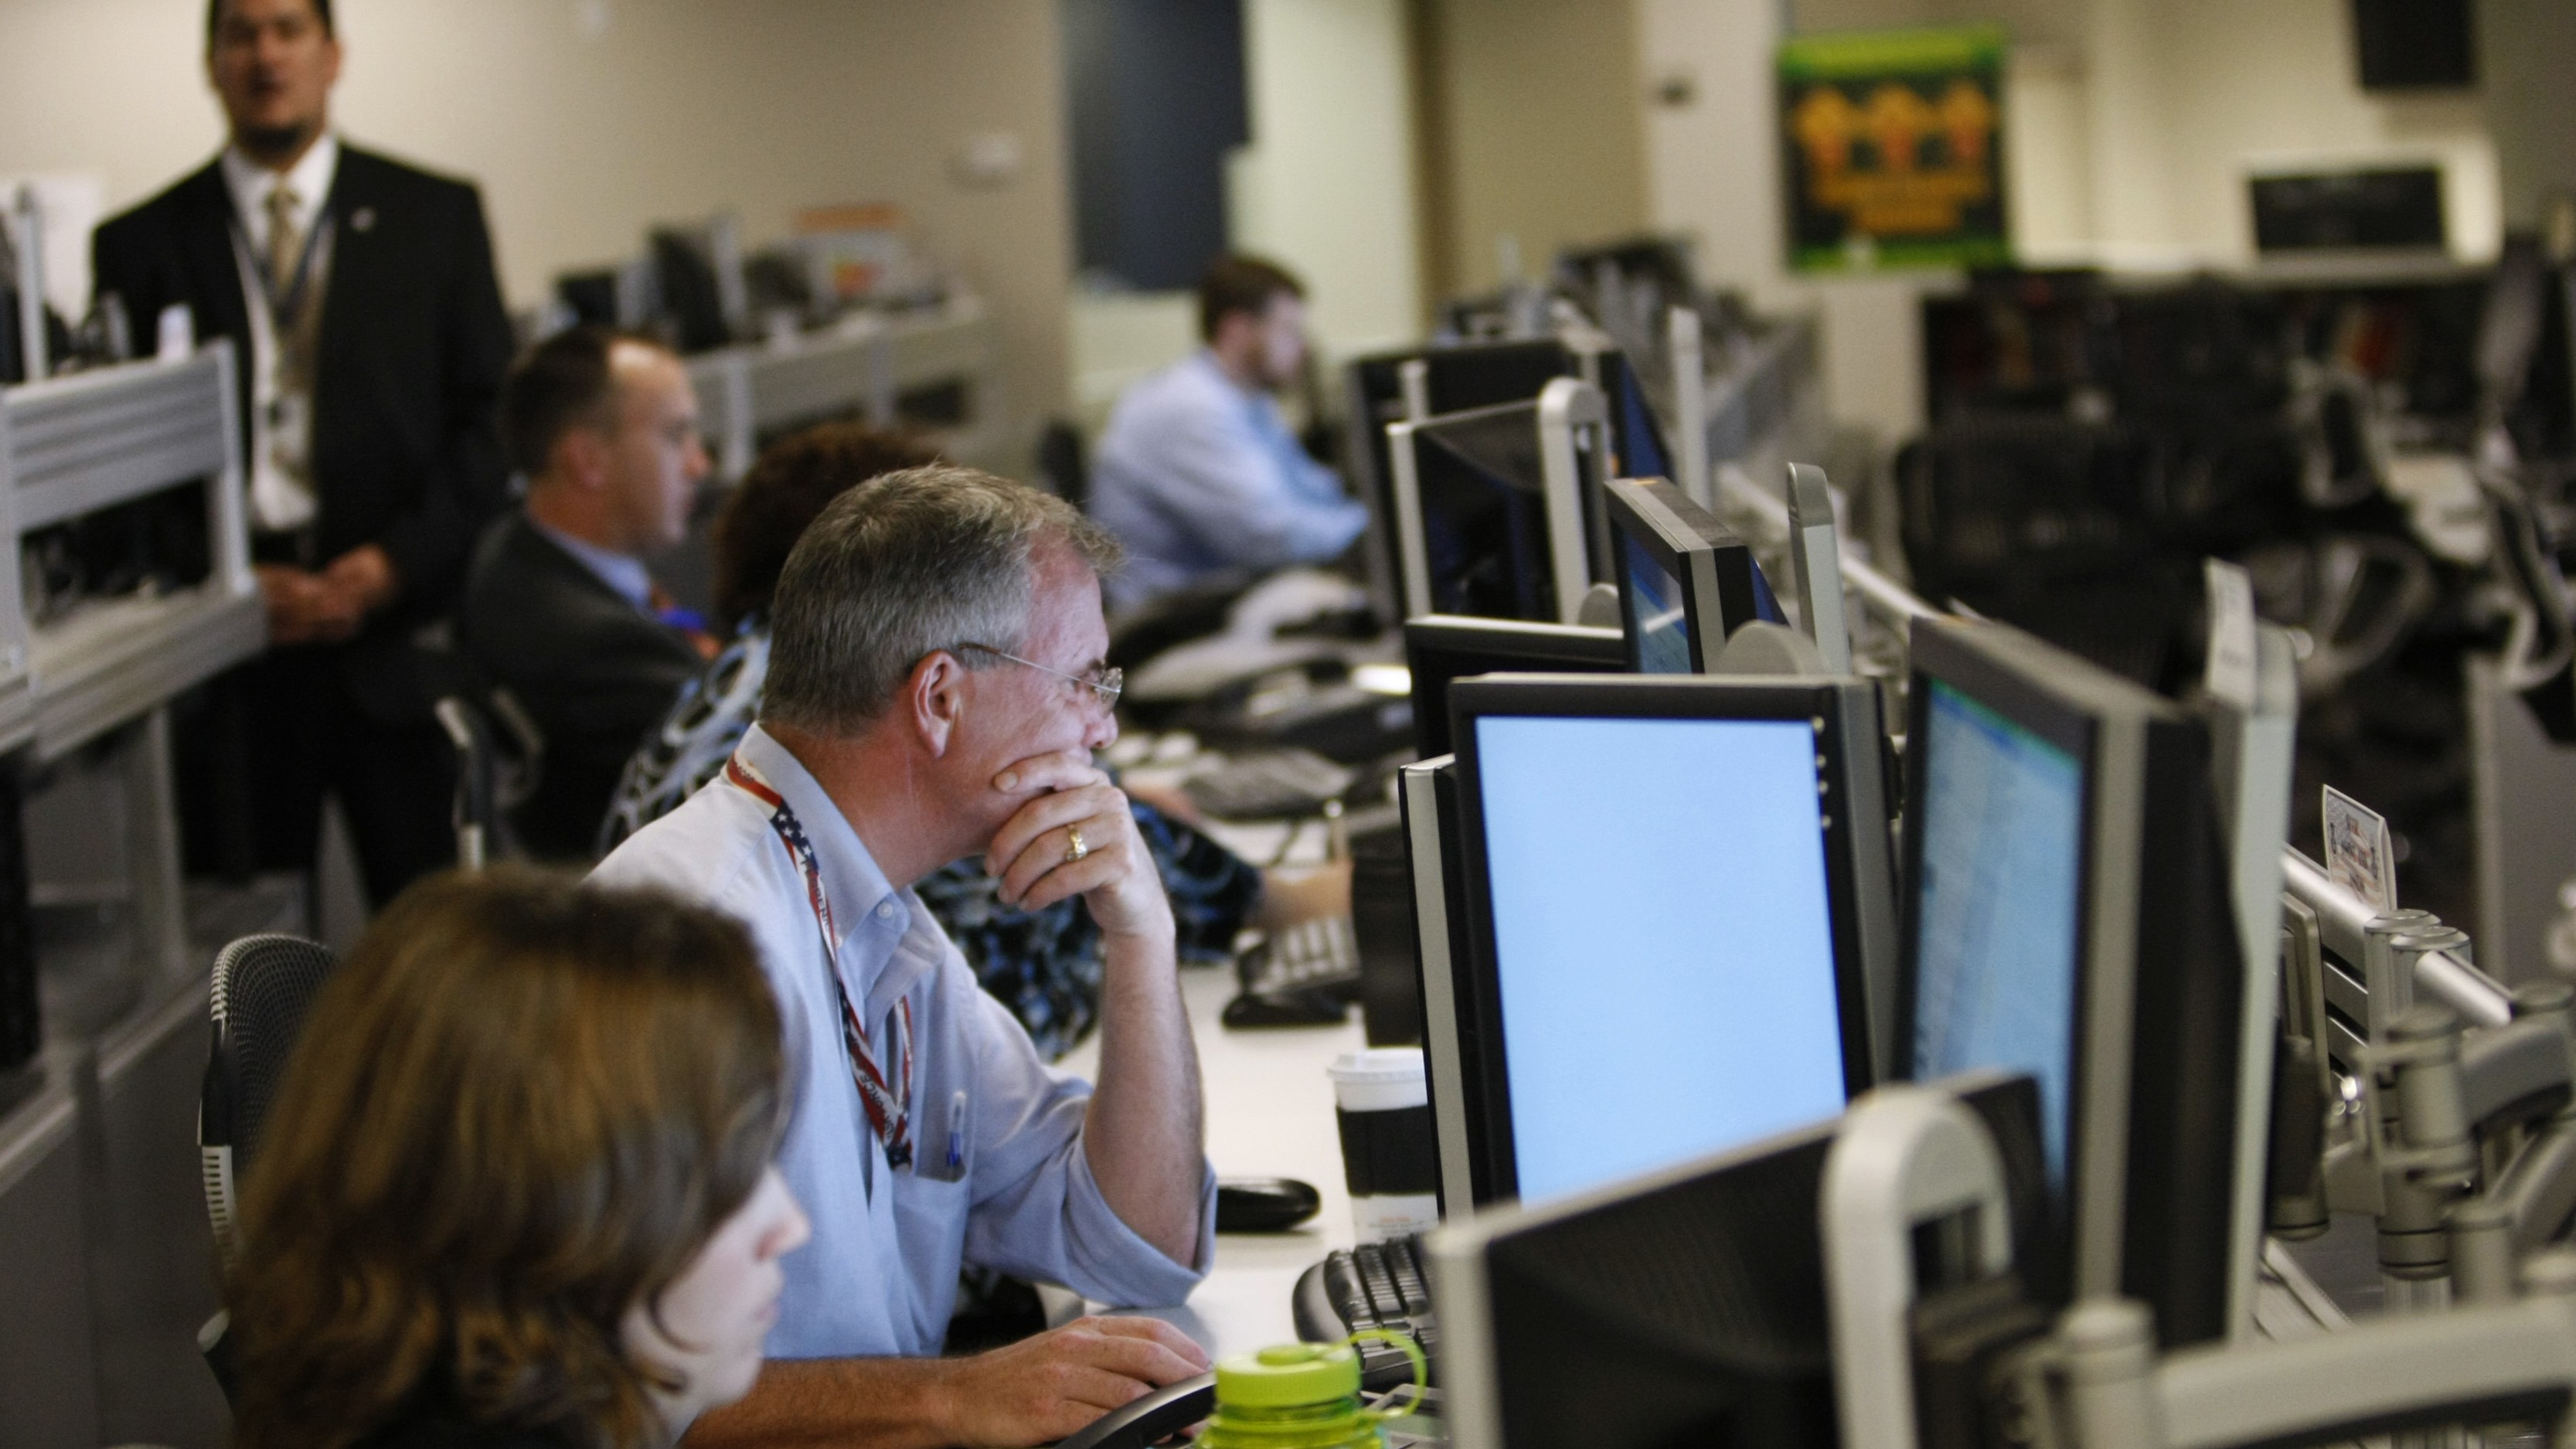 US department of homeland security analysts work at the National Cybersecurity & Communications Integration Centre located in Arlington, Virginia